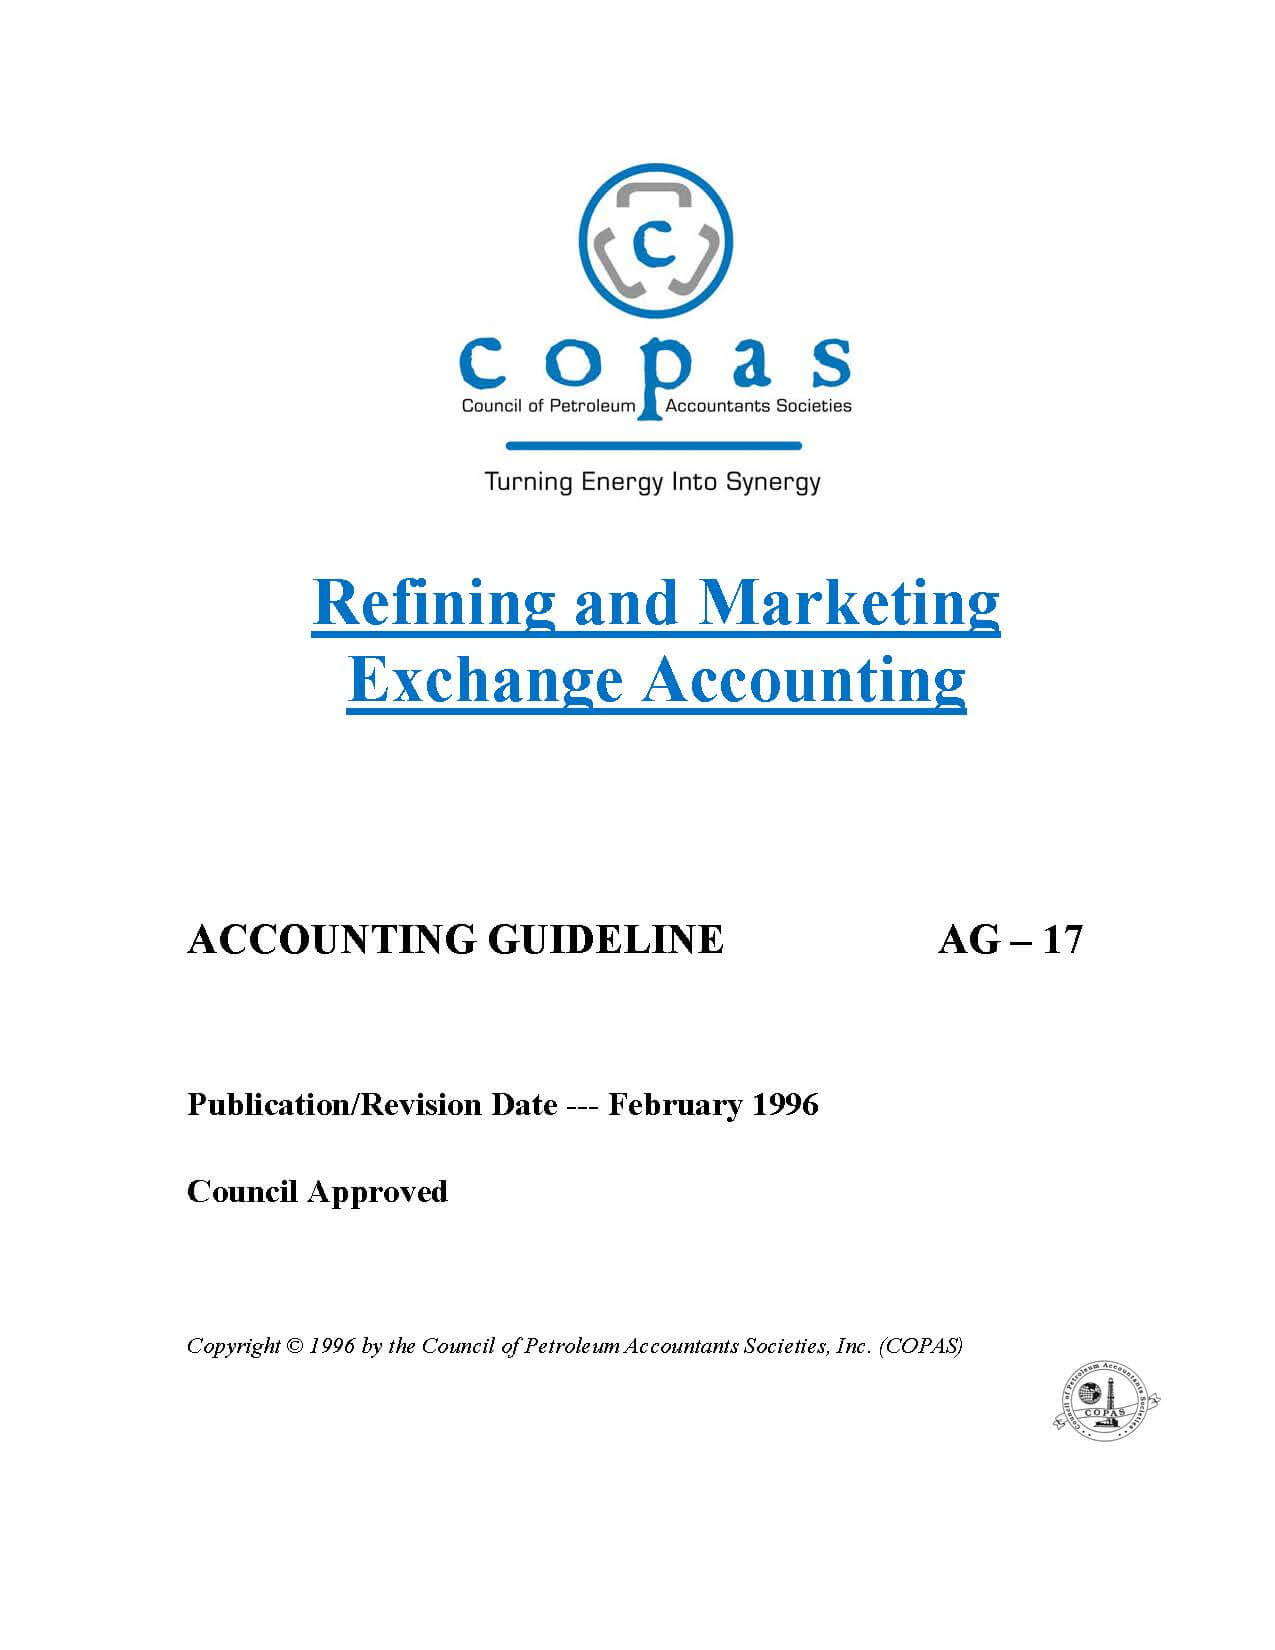 AG-17 Refining And Marketing Exchange Accounting - products AG - Council of Petroleum Accountants Societies